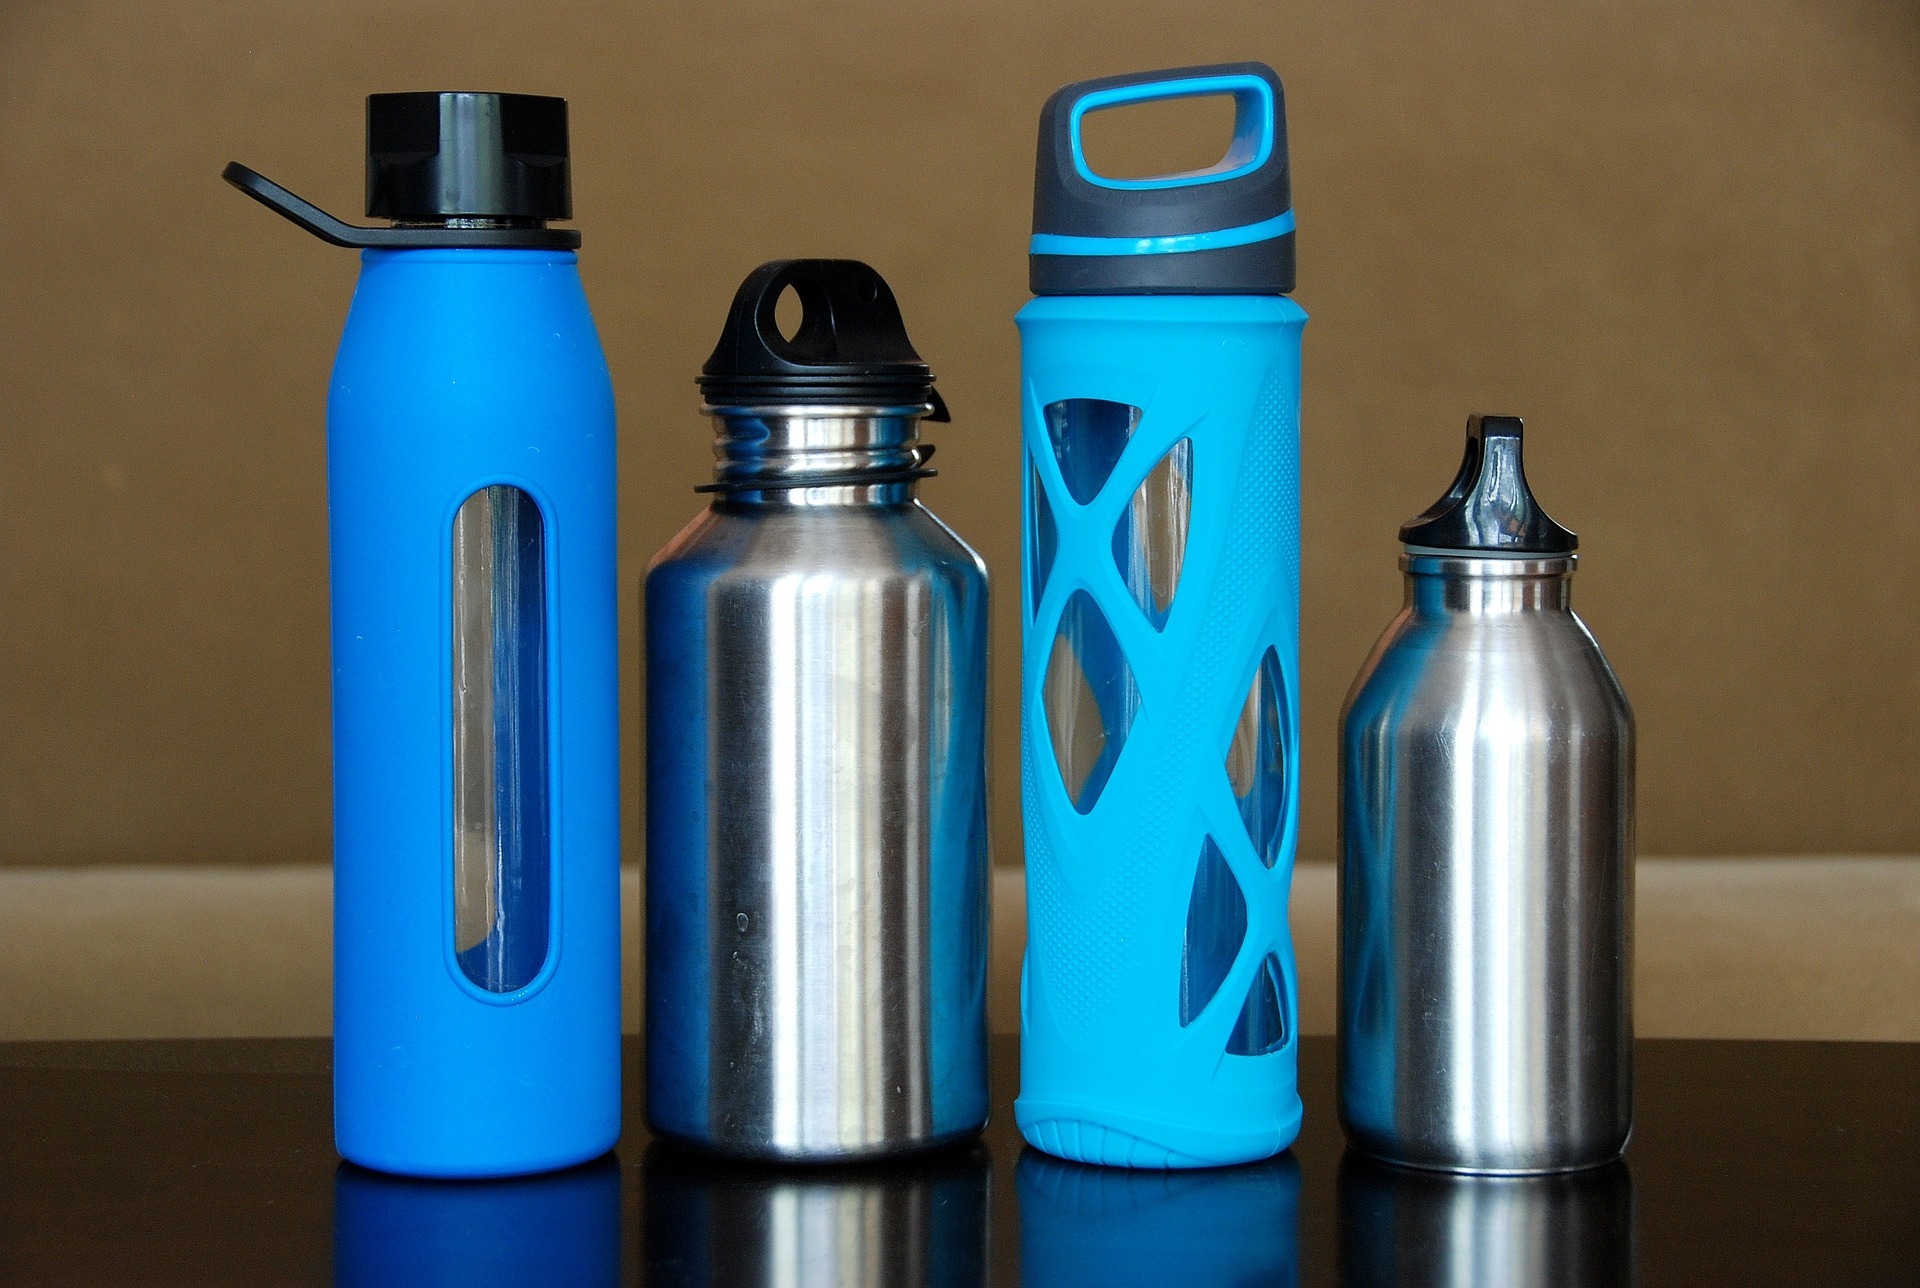 Make sure to pack a water bottle in your day bag